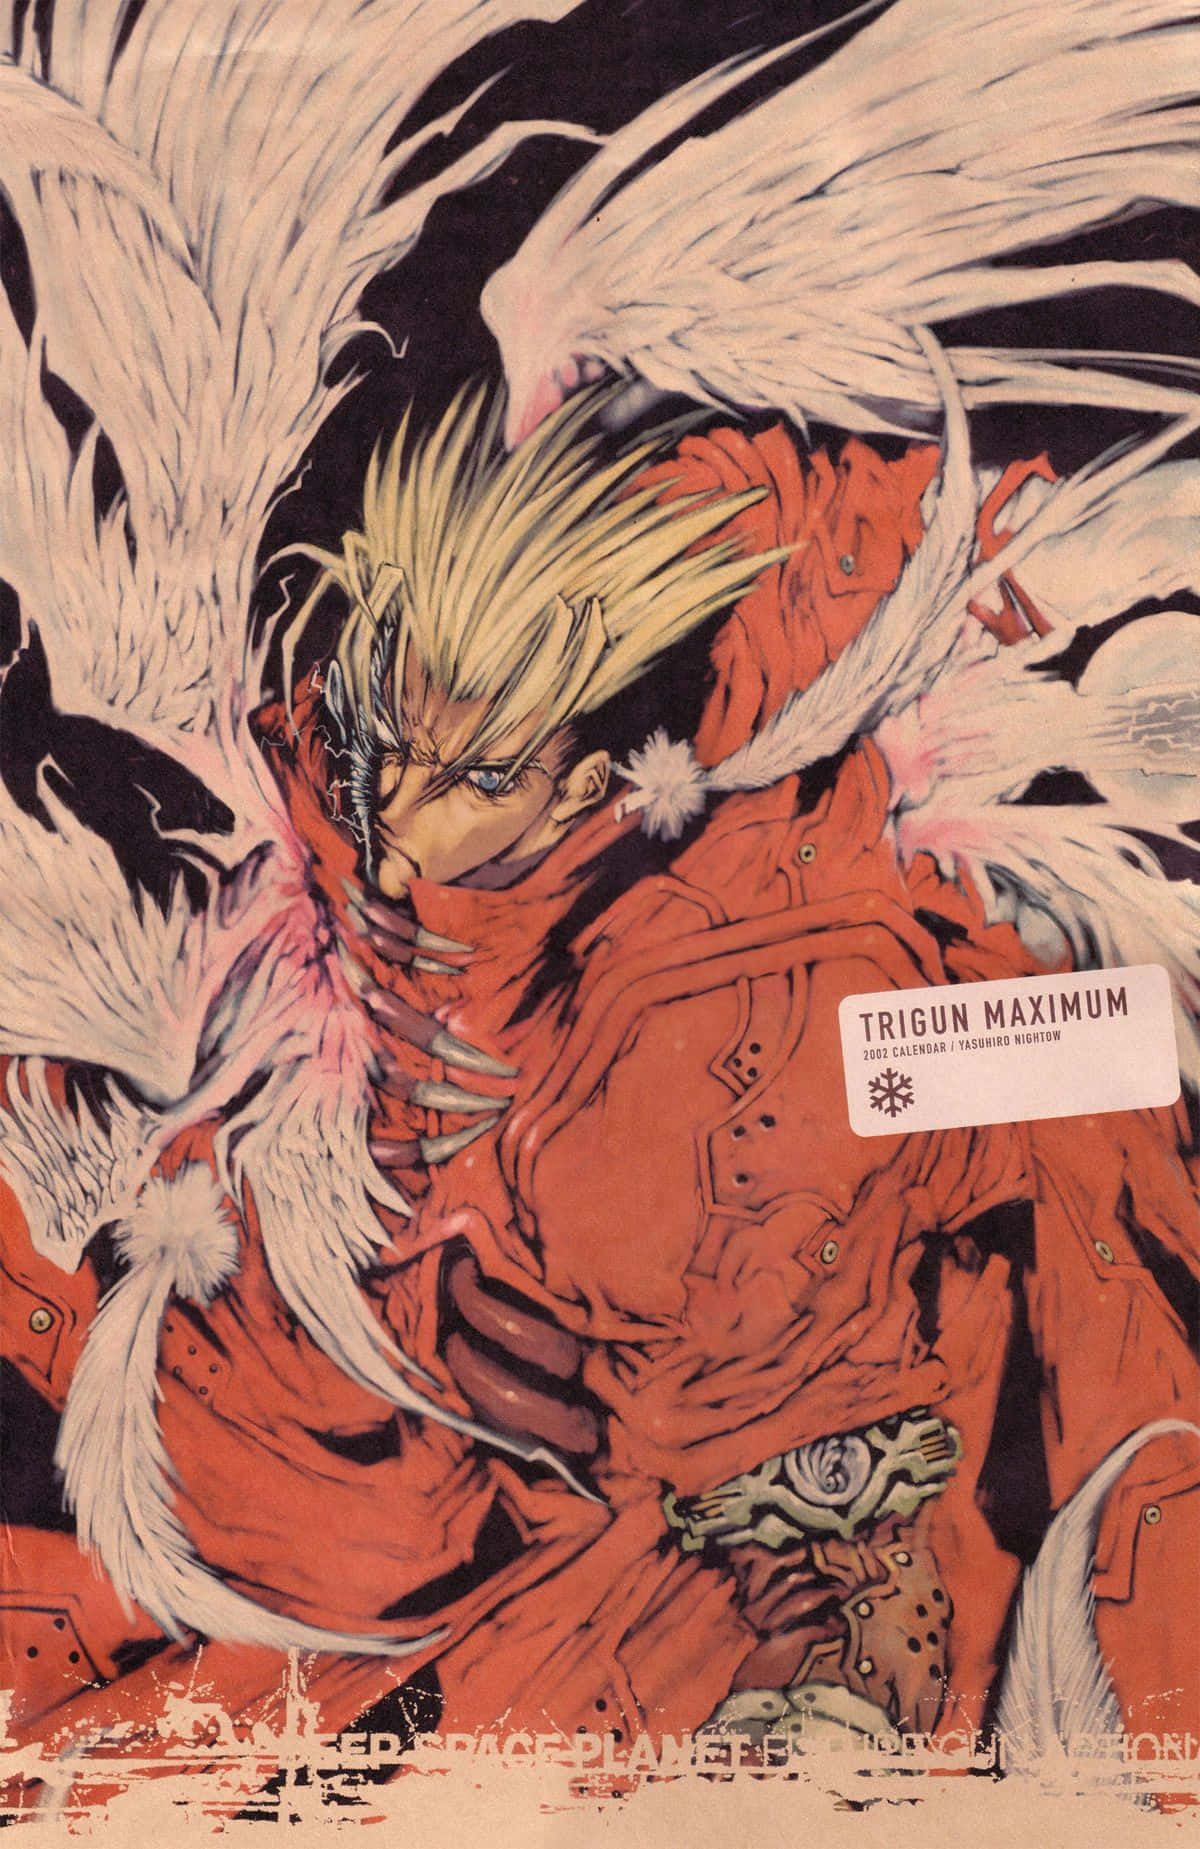 Vash the Stampede lives on in Trigun's iconic anime series